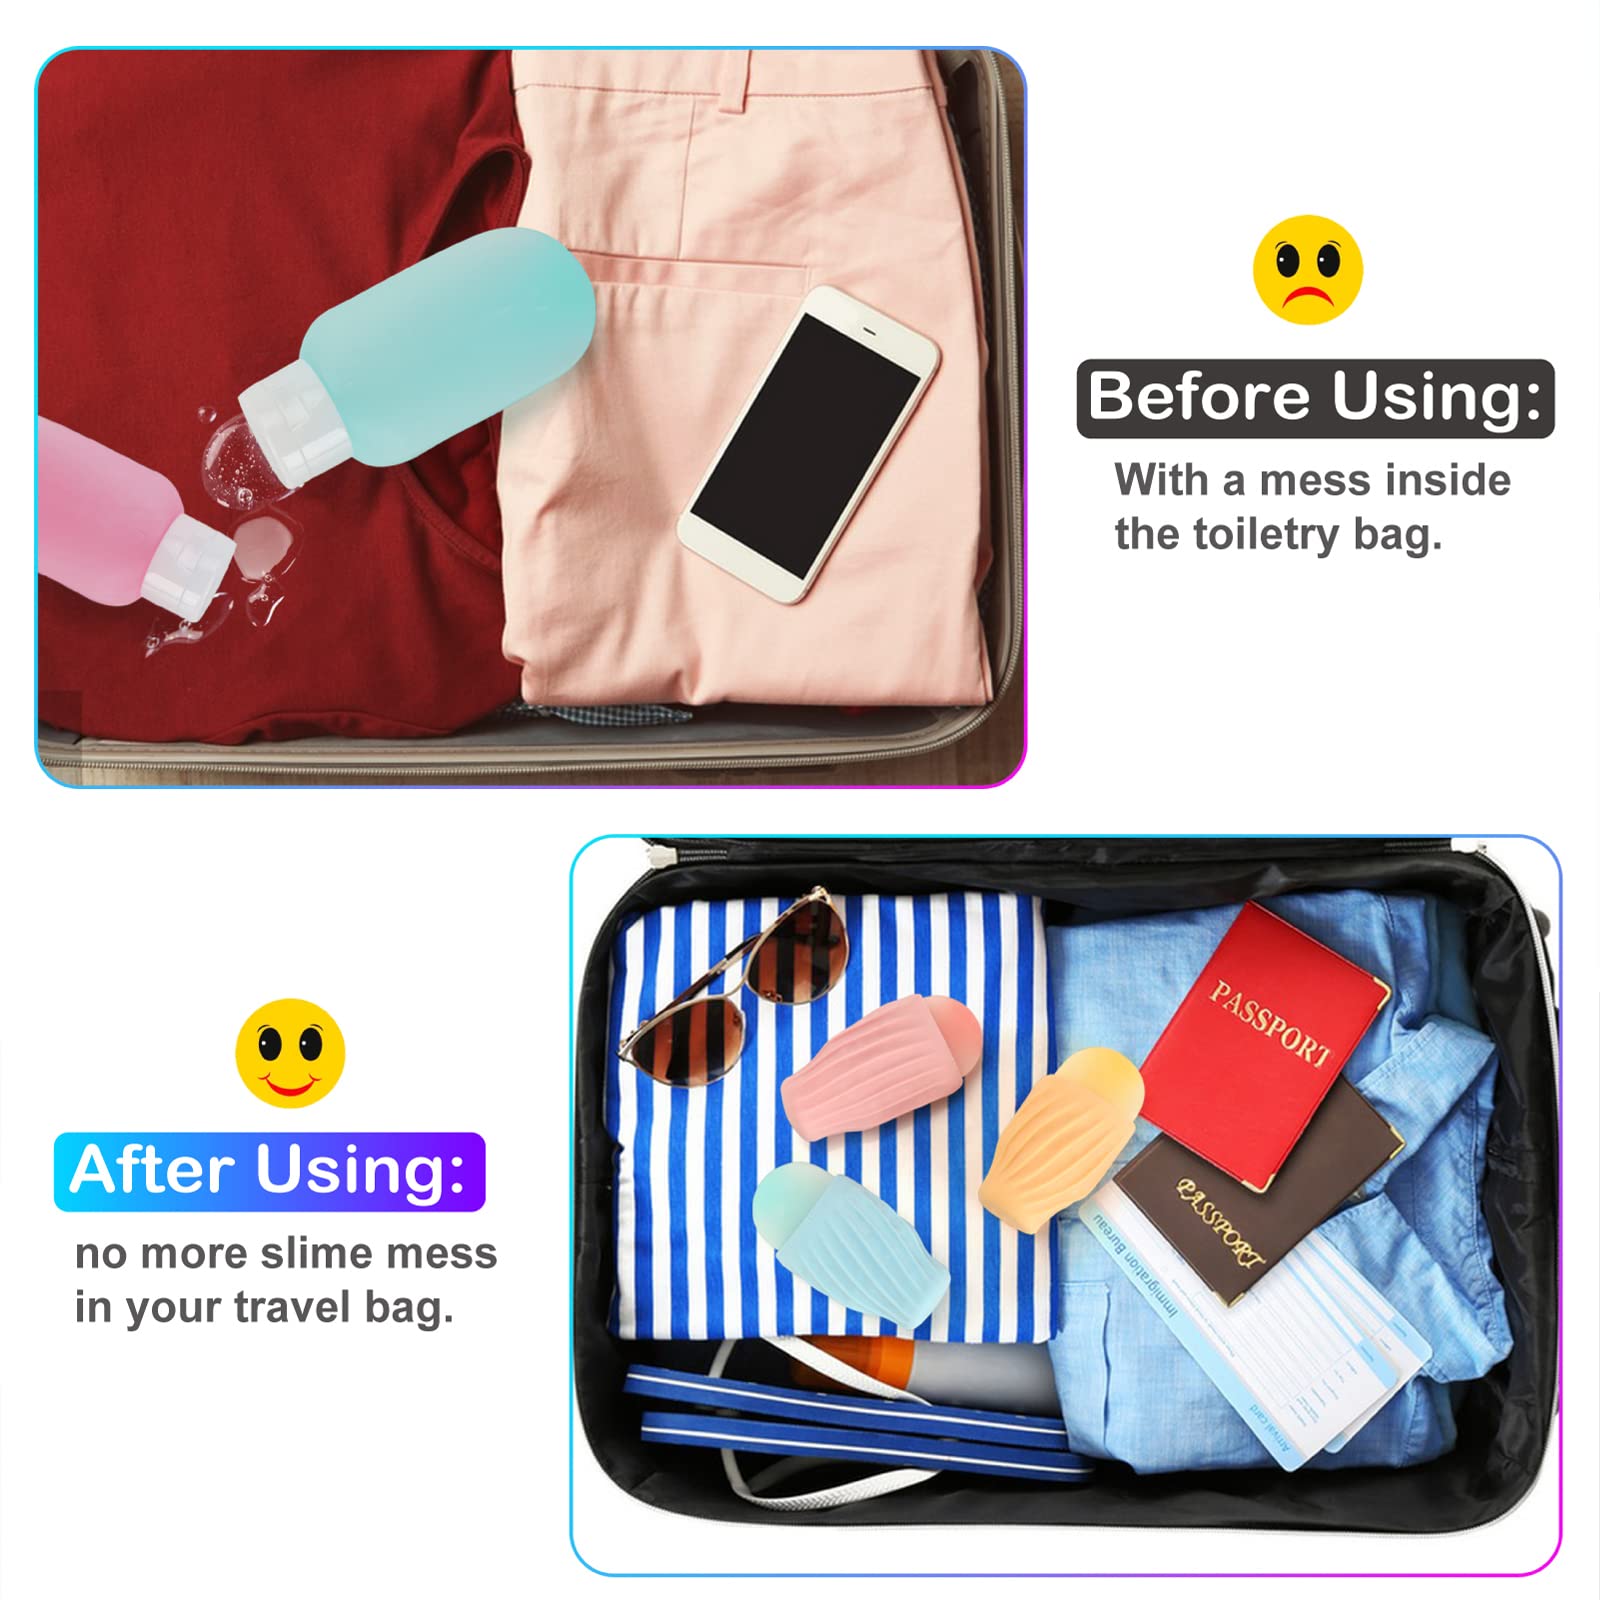 Volnamal 4 Pack Elastic Sleeves for Leak Proofing Travel, Leak Proof Sleeves for Travel Container in Luggage, Reusable Accessory for Travel Toiletries, Colorful